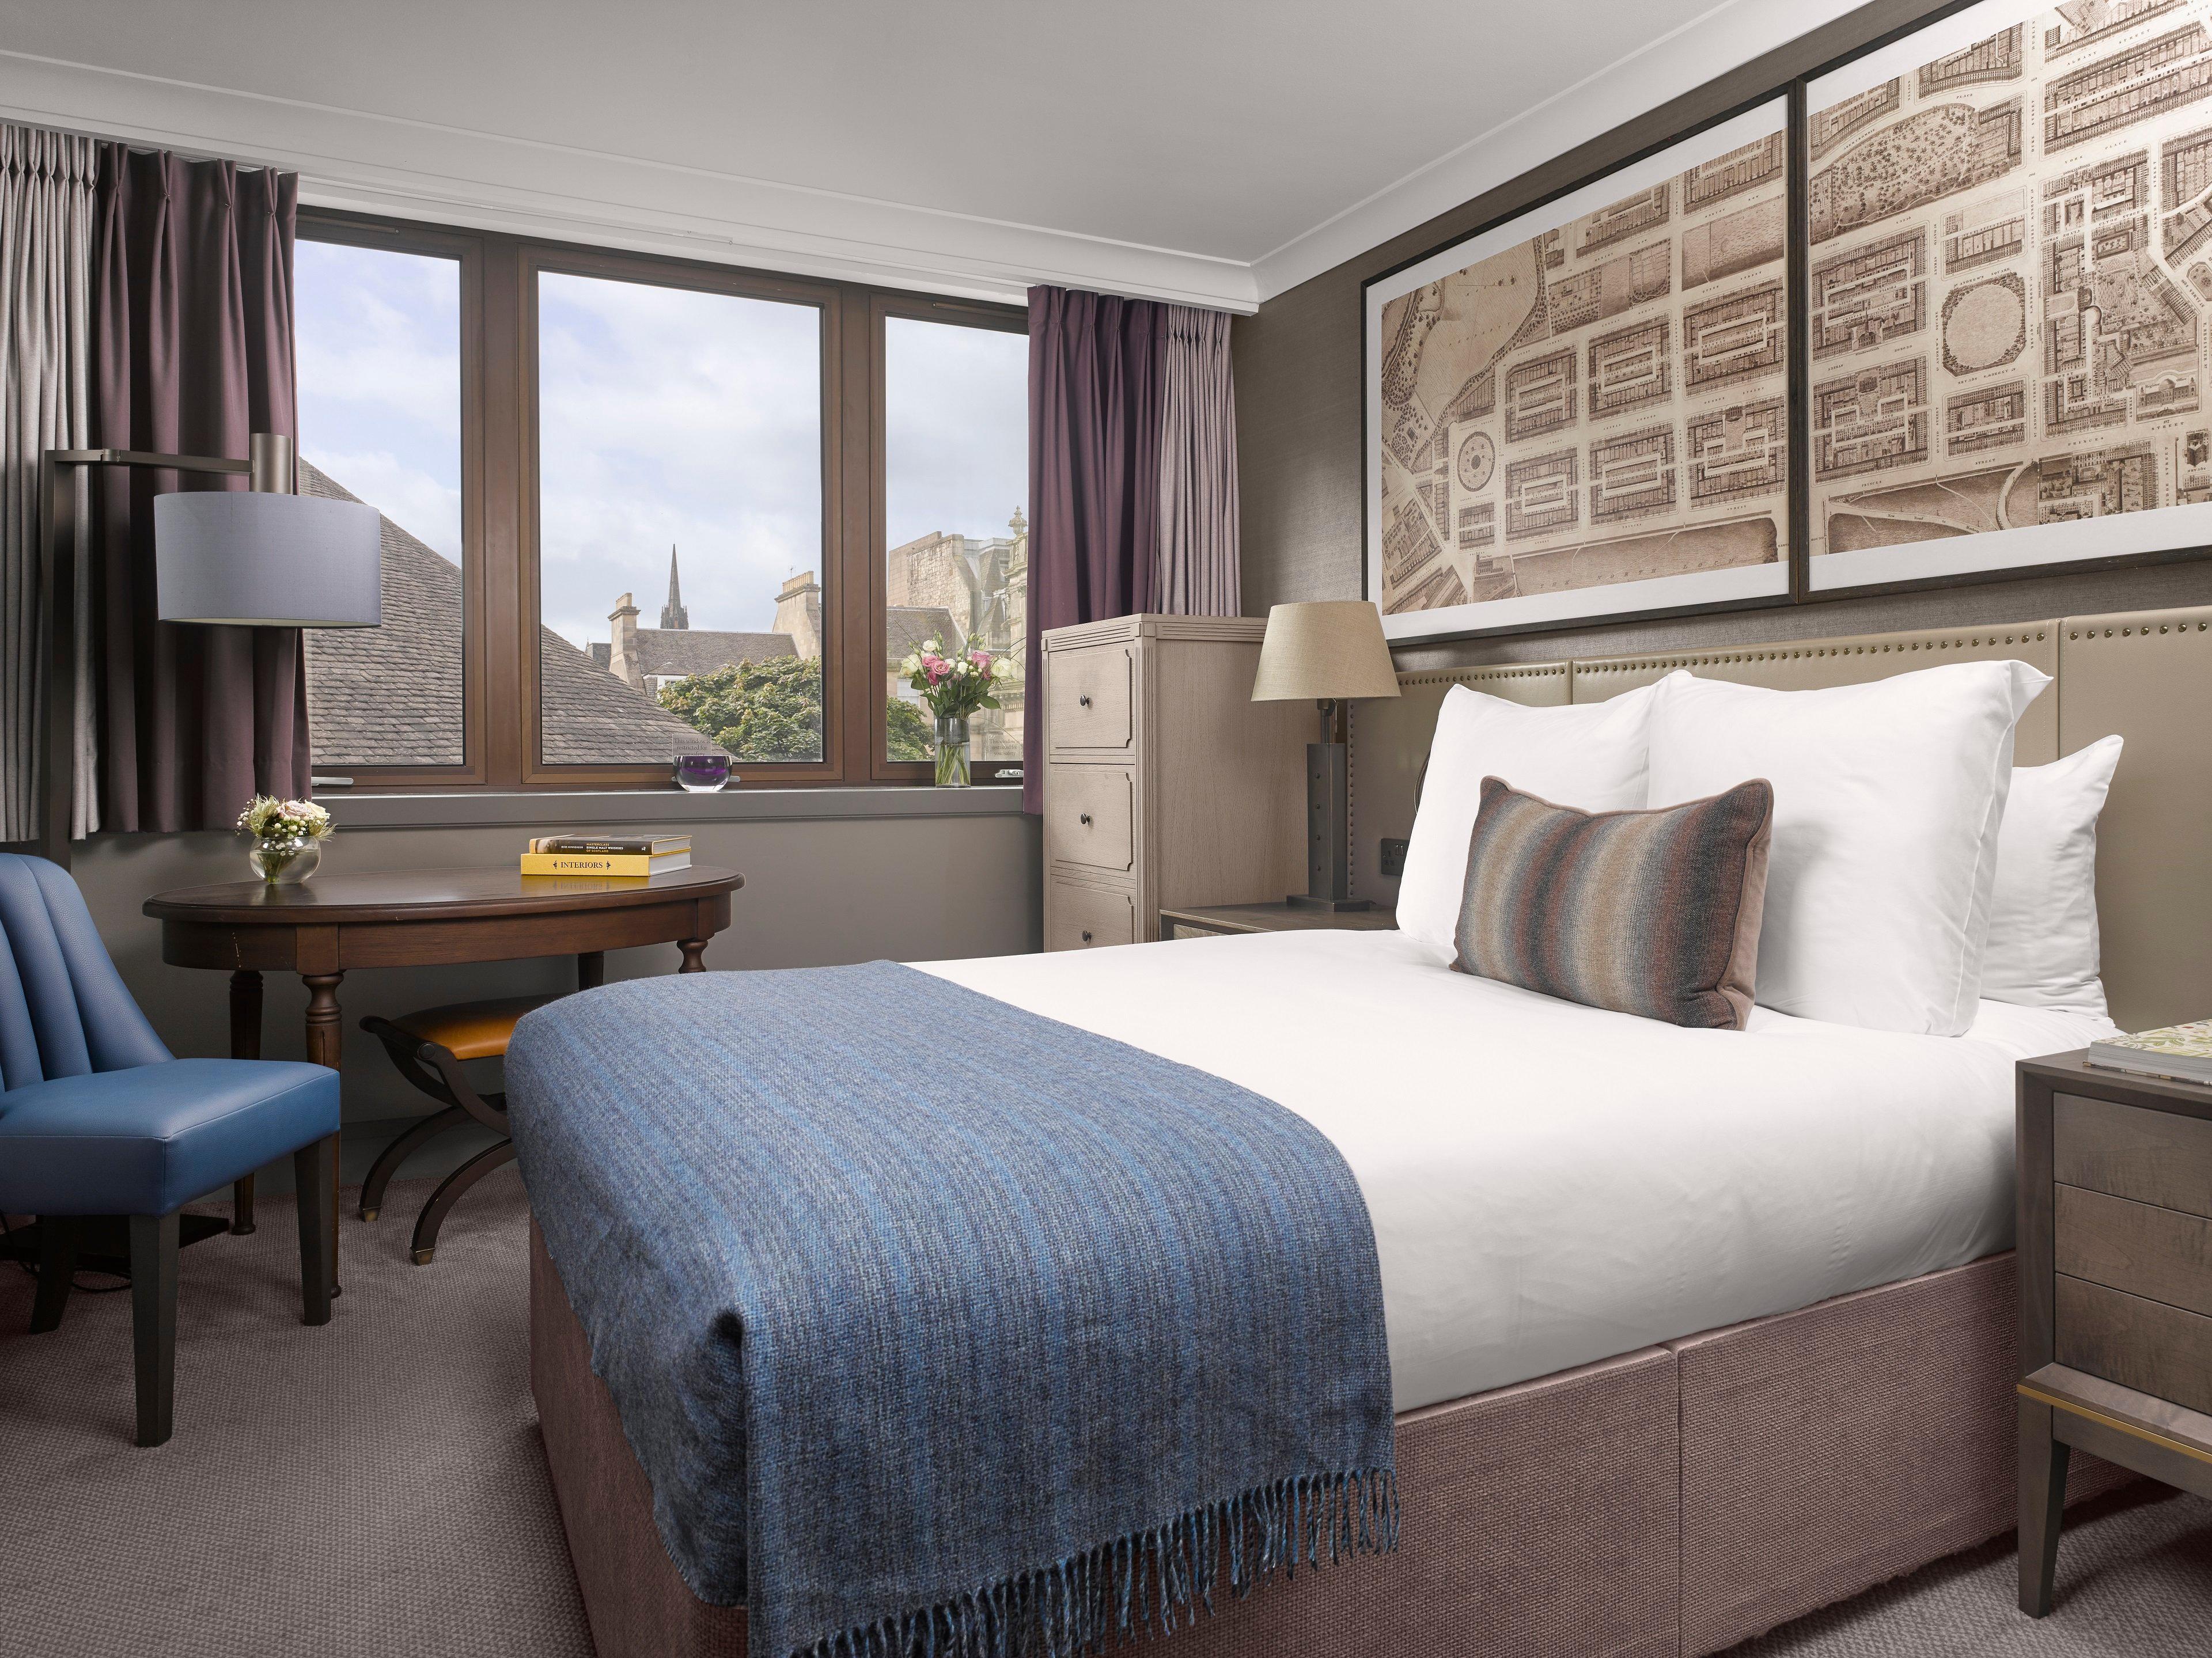 Our luxury double bedrooms are elegantly designed